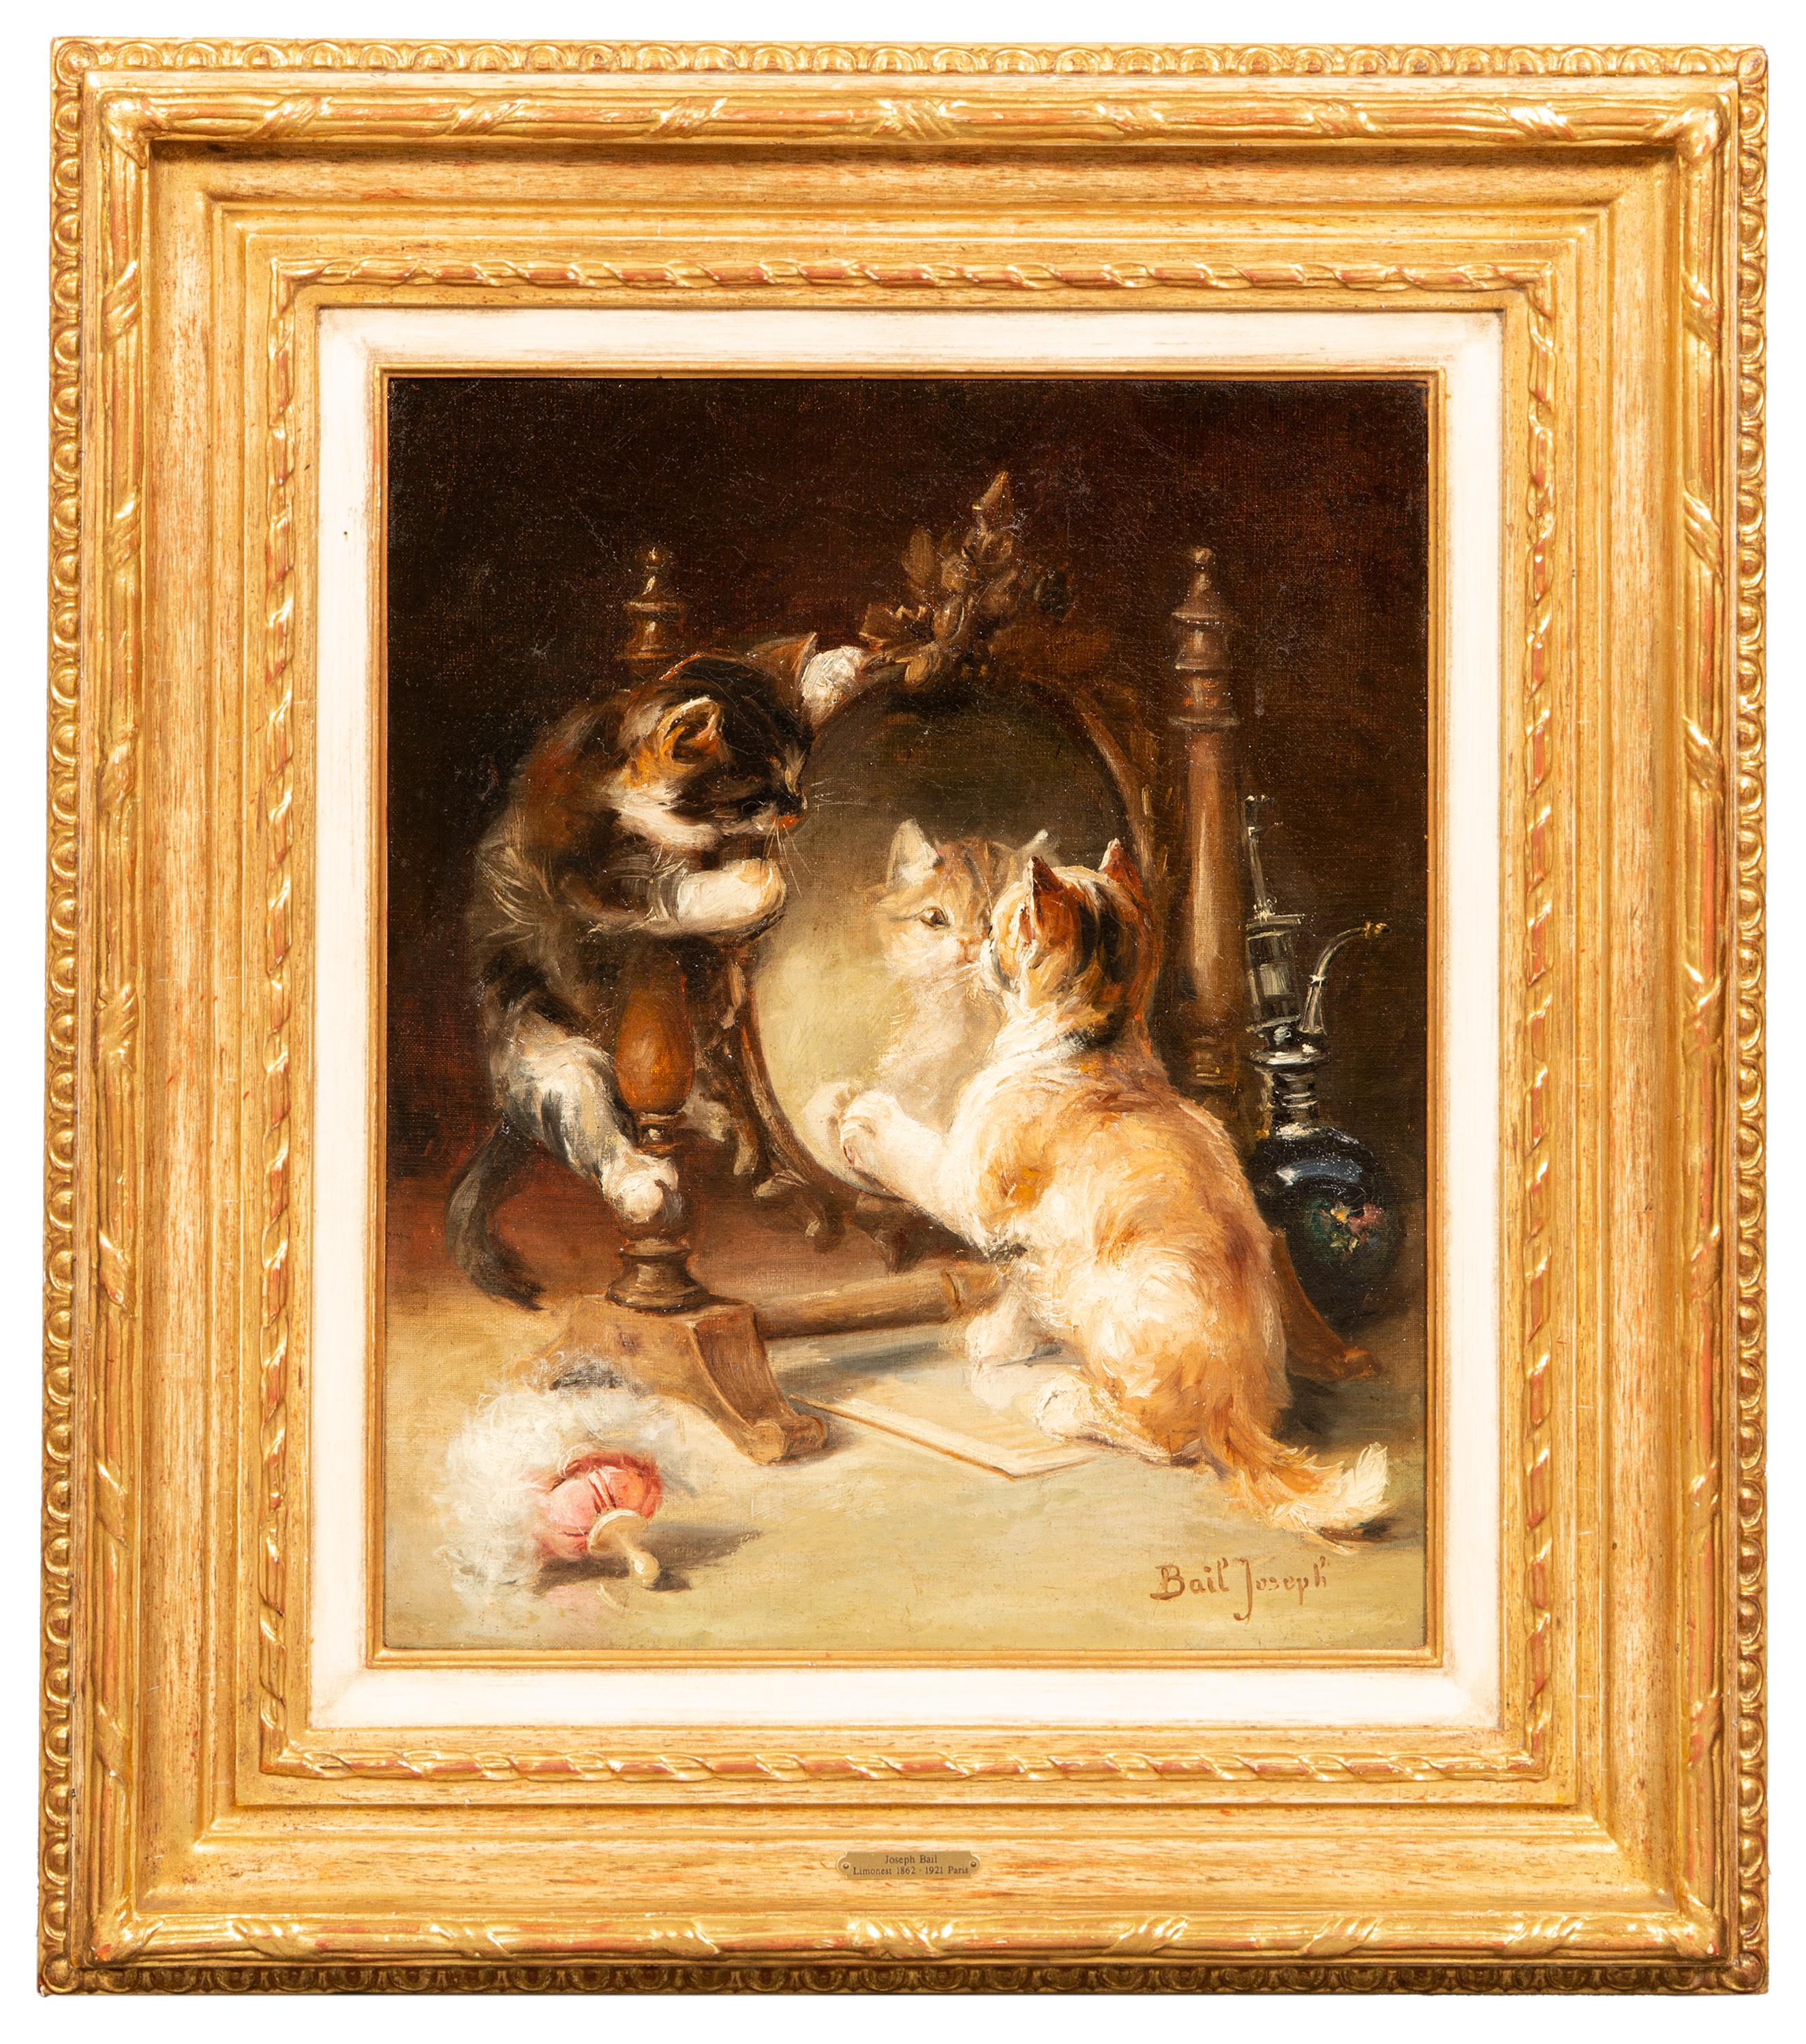 Joseph Bail
Limonest 1862 – 1921 Paris
French Painter

‘Cats Playing around a Mirror’

Signature: signed lower right ‘Bail Joseph’ 
Medium: oil on canvas 
Dimensions: image size 45,5 x 37,5 cm, frame size 69 x 61 cm 

Provenance: from a private Duch